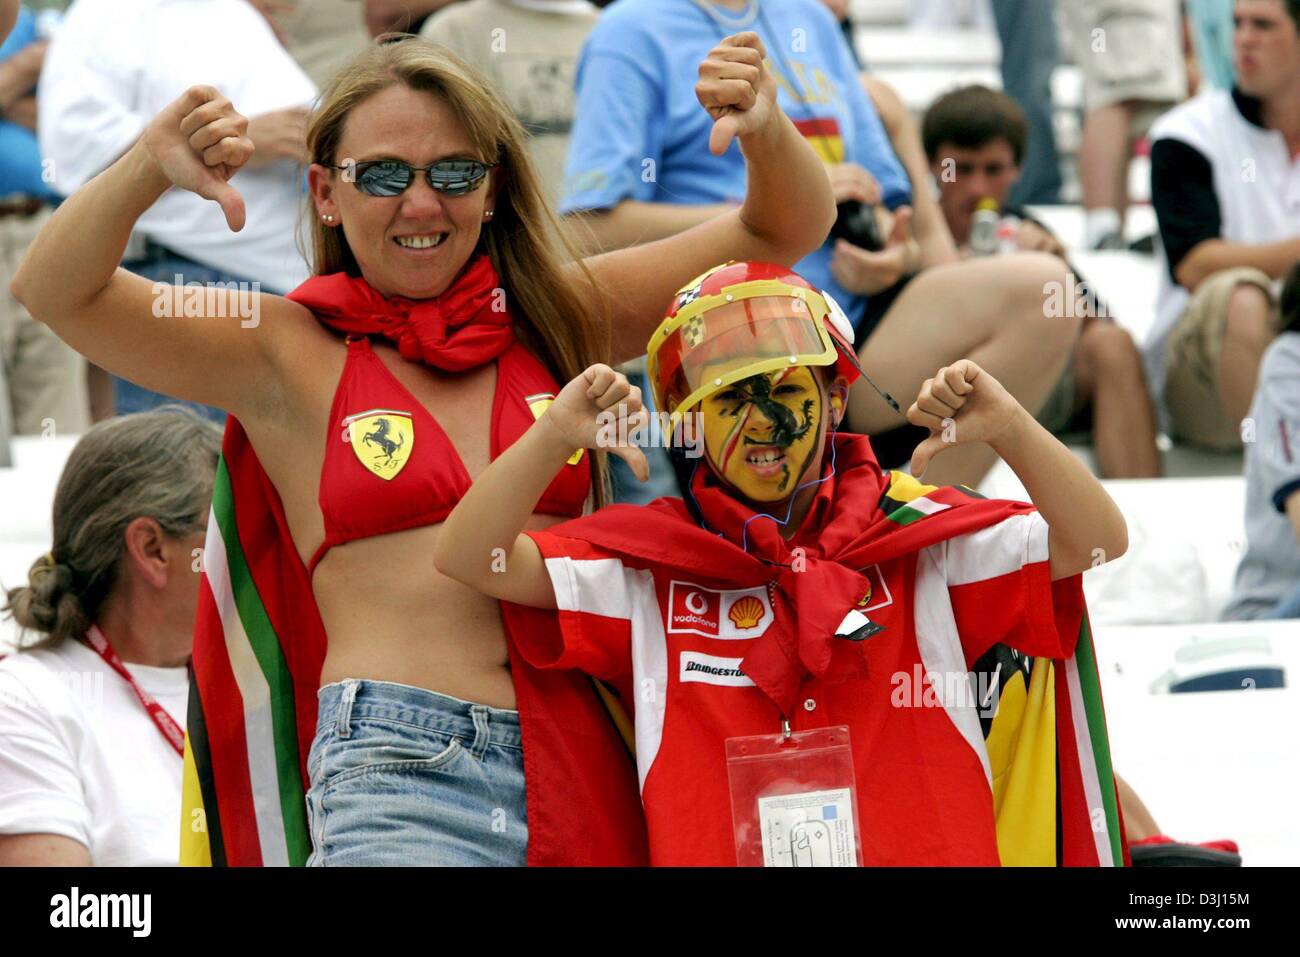 https://c8.alamy.com/comp/D3J15M/dpa-the-picture-shows-formula-one-fans-protesting-with-thumbs-down-D3J15M.jpg